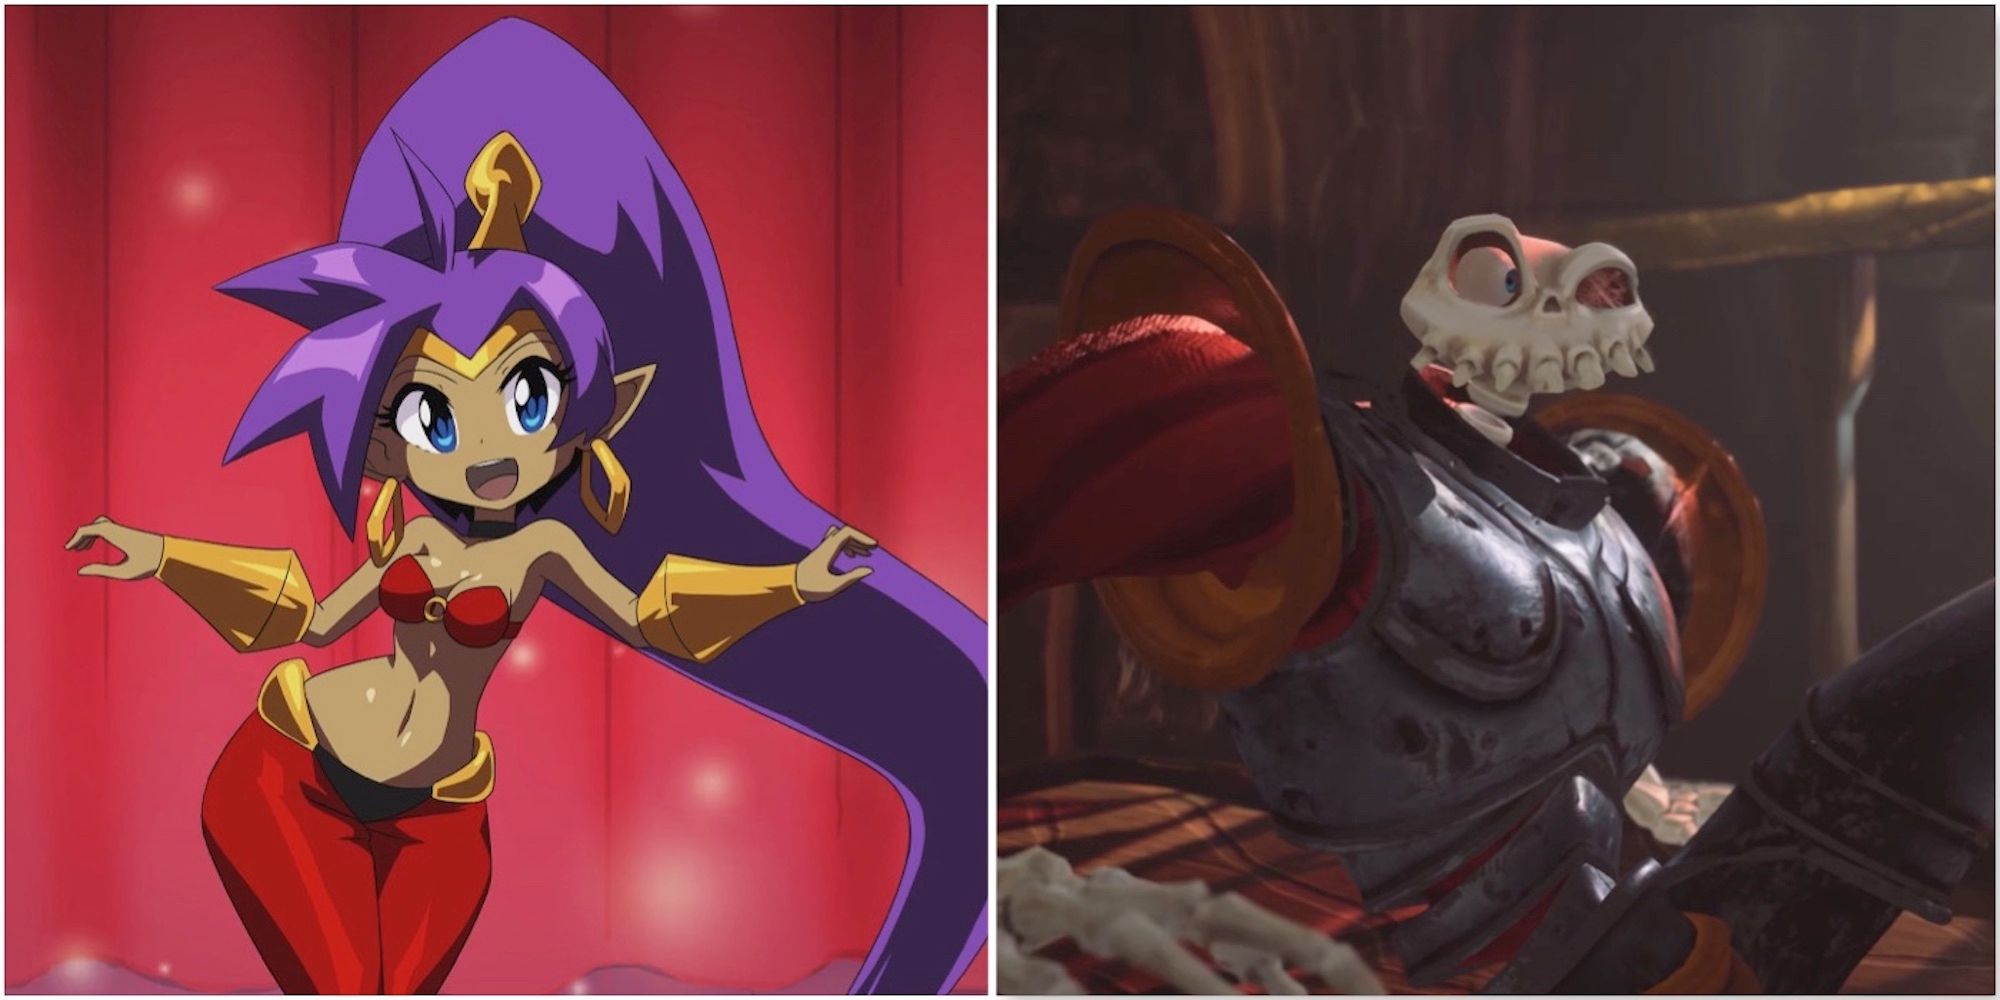 Shantae in Shantae and the Seven Sirens and Sir Daniel in MediEvil